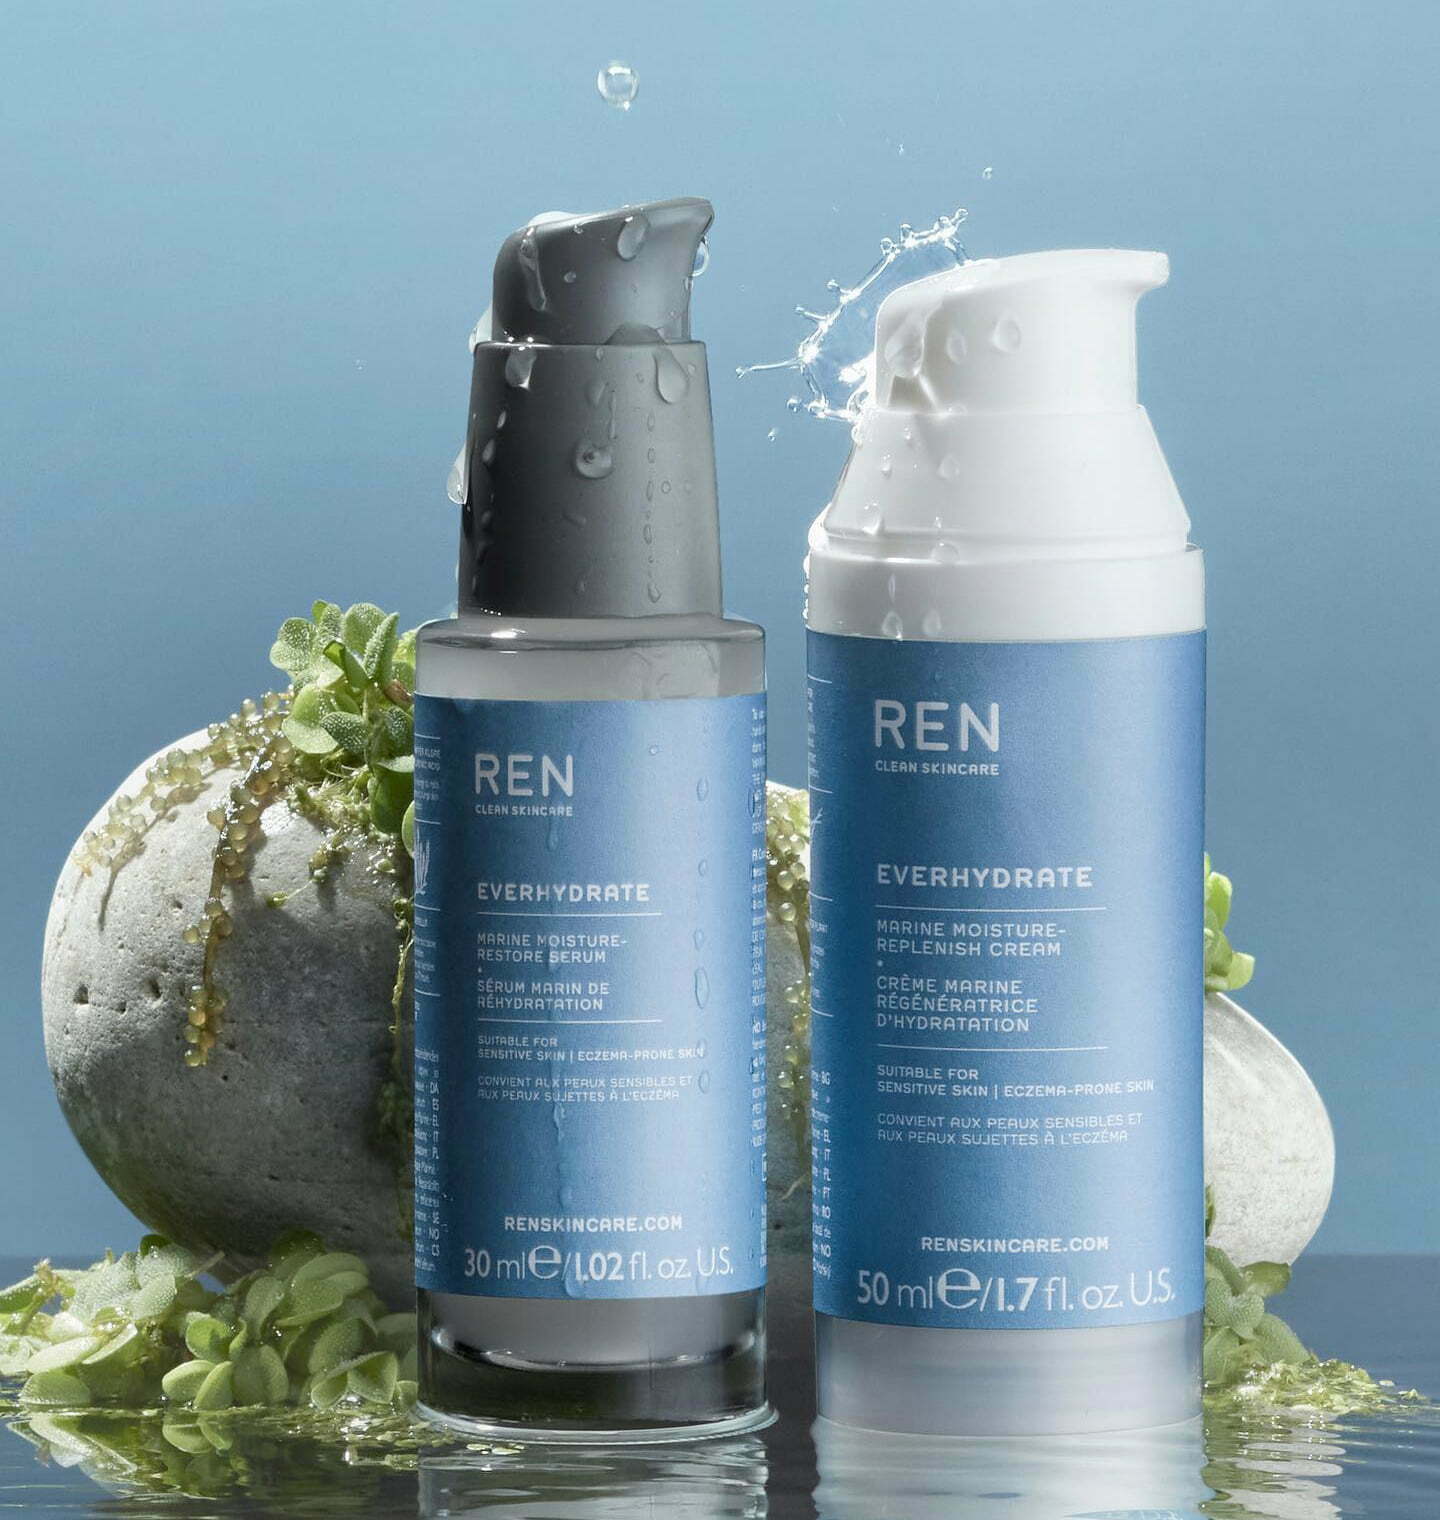 New launches from Ren Clean Skincare